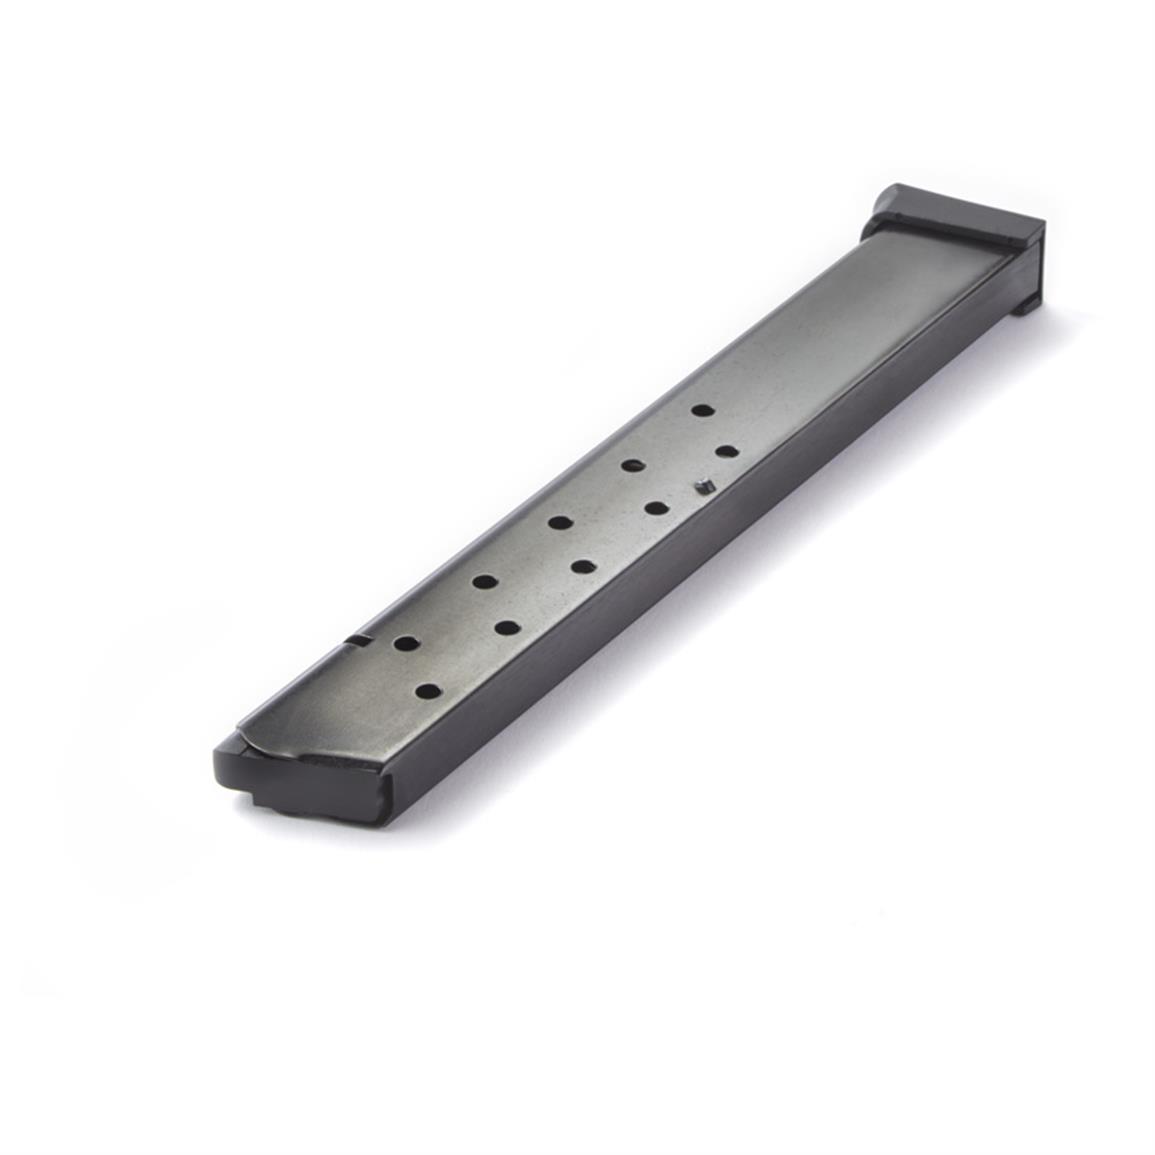 American Tactical Imports 1911 10-Round Magazine for sale online 